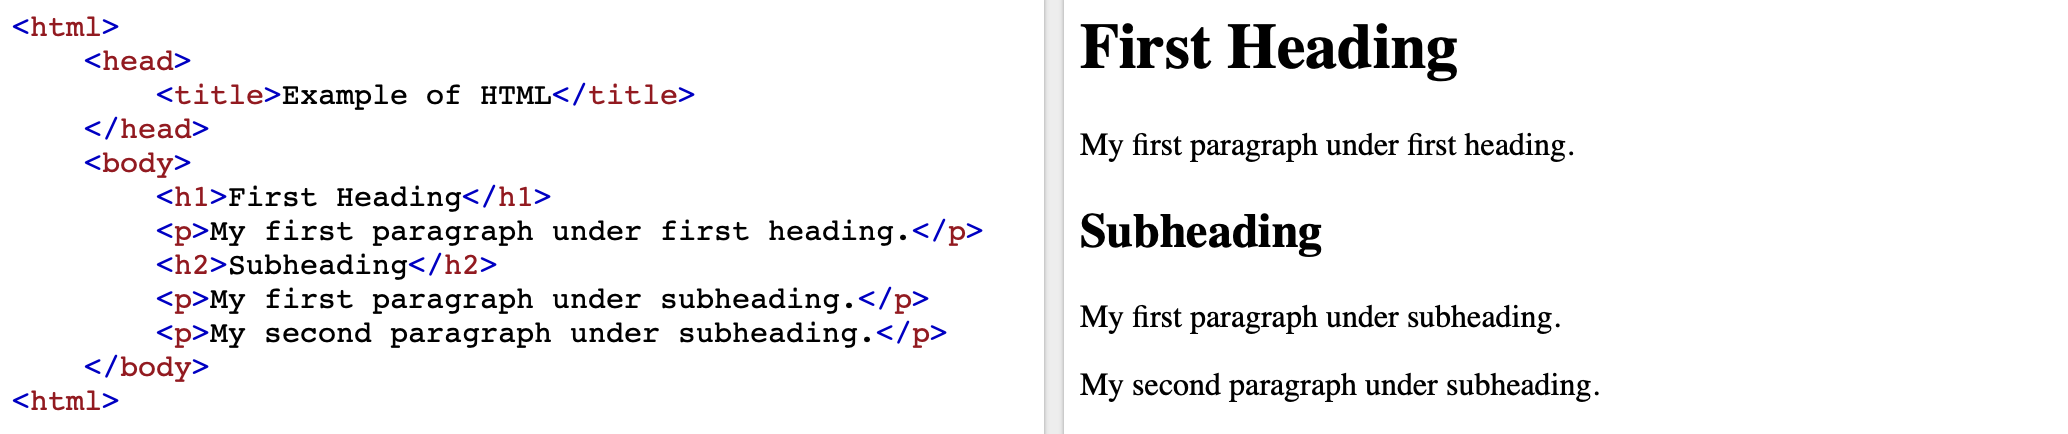 HTML to Page Example